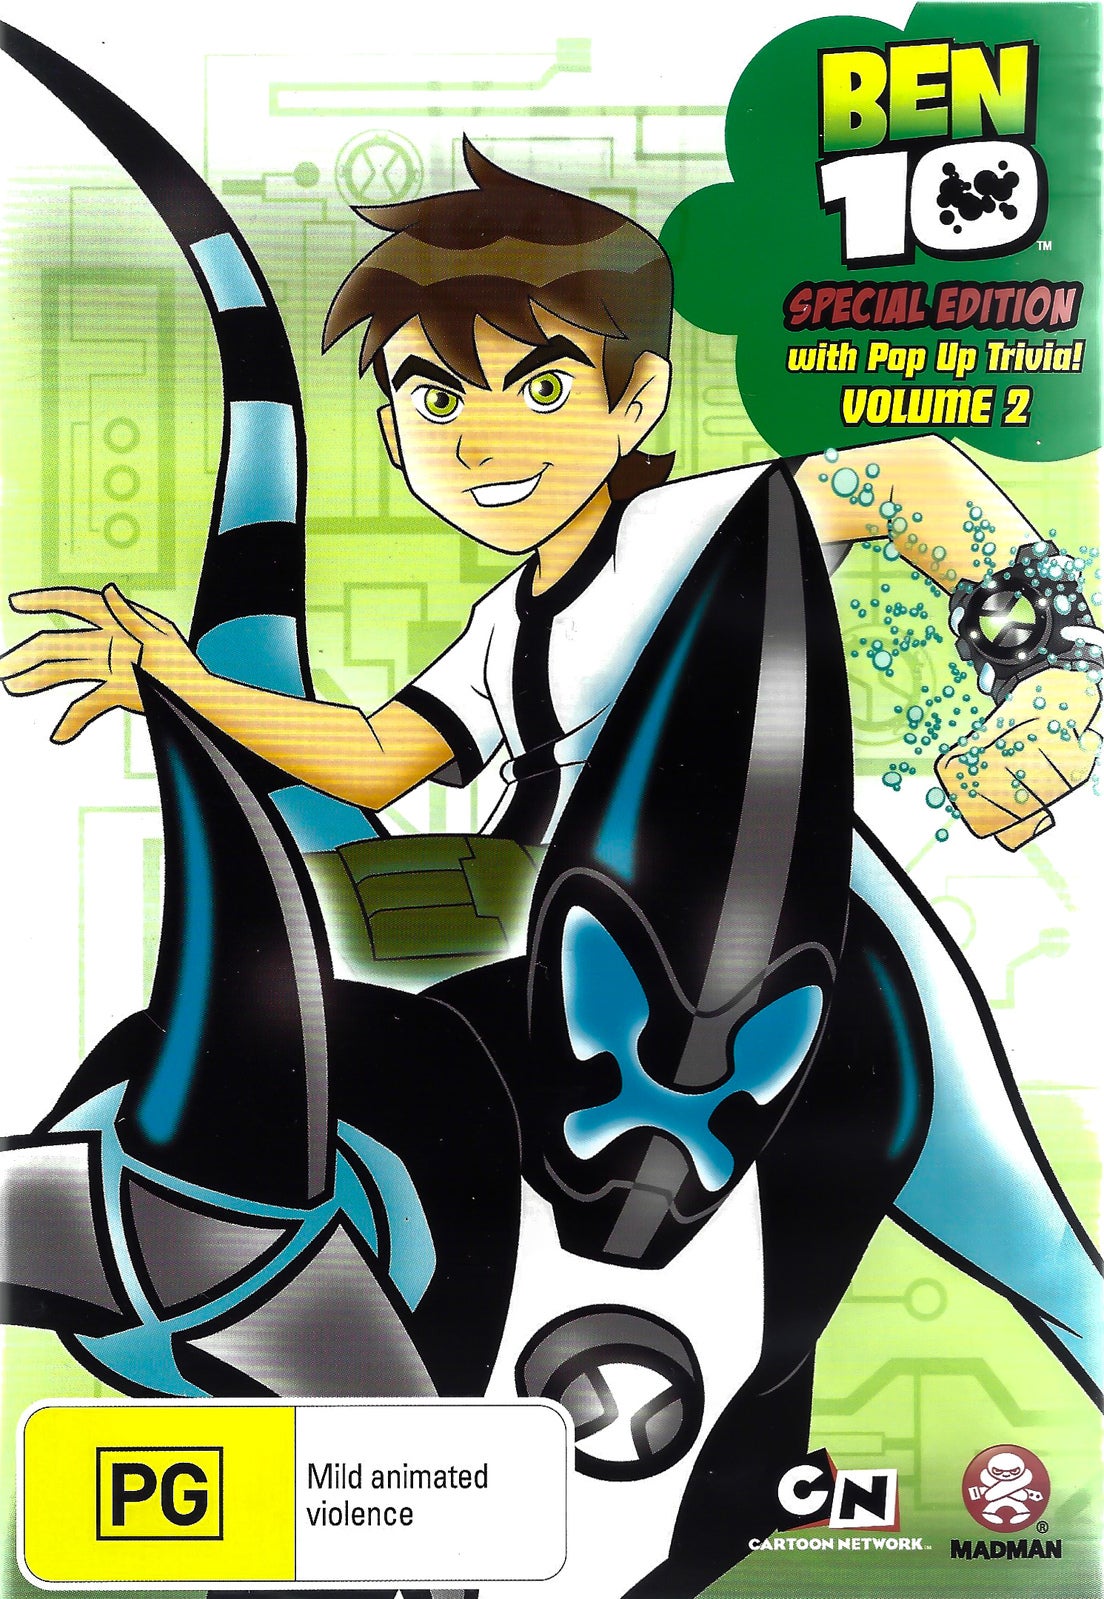 Ben 10 Special Edition with Pop Up Trivia! Volume 2 -Kids DVD Series New